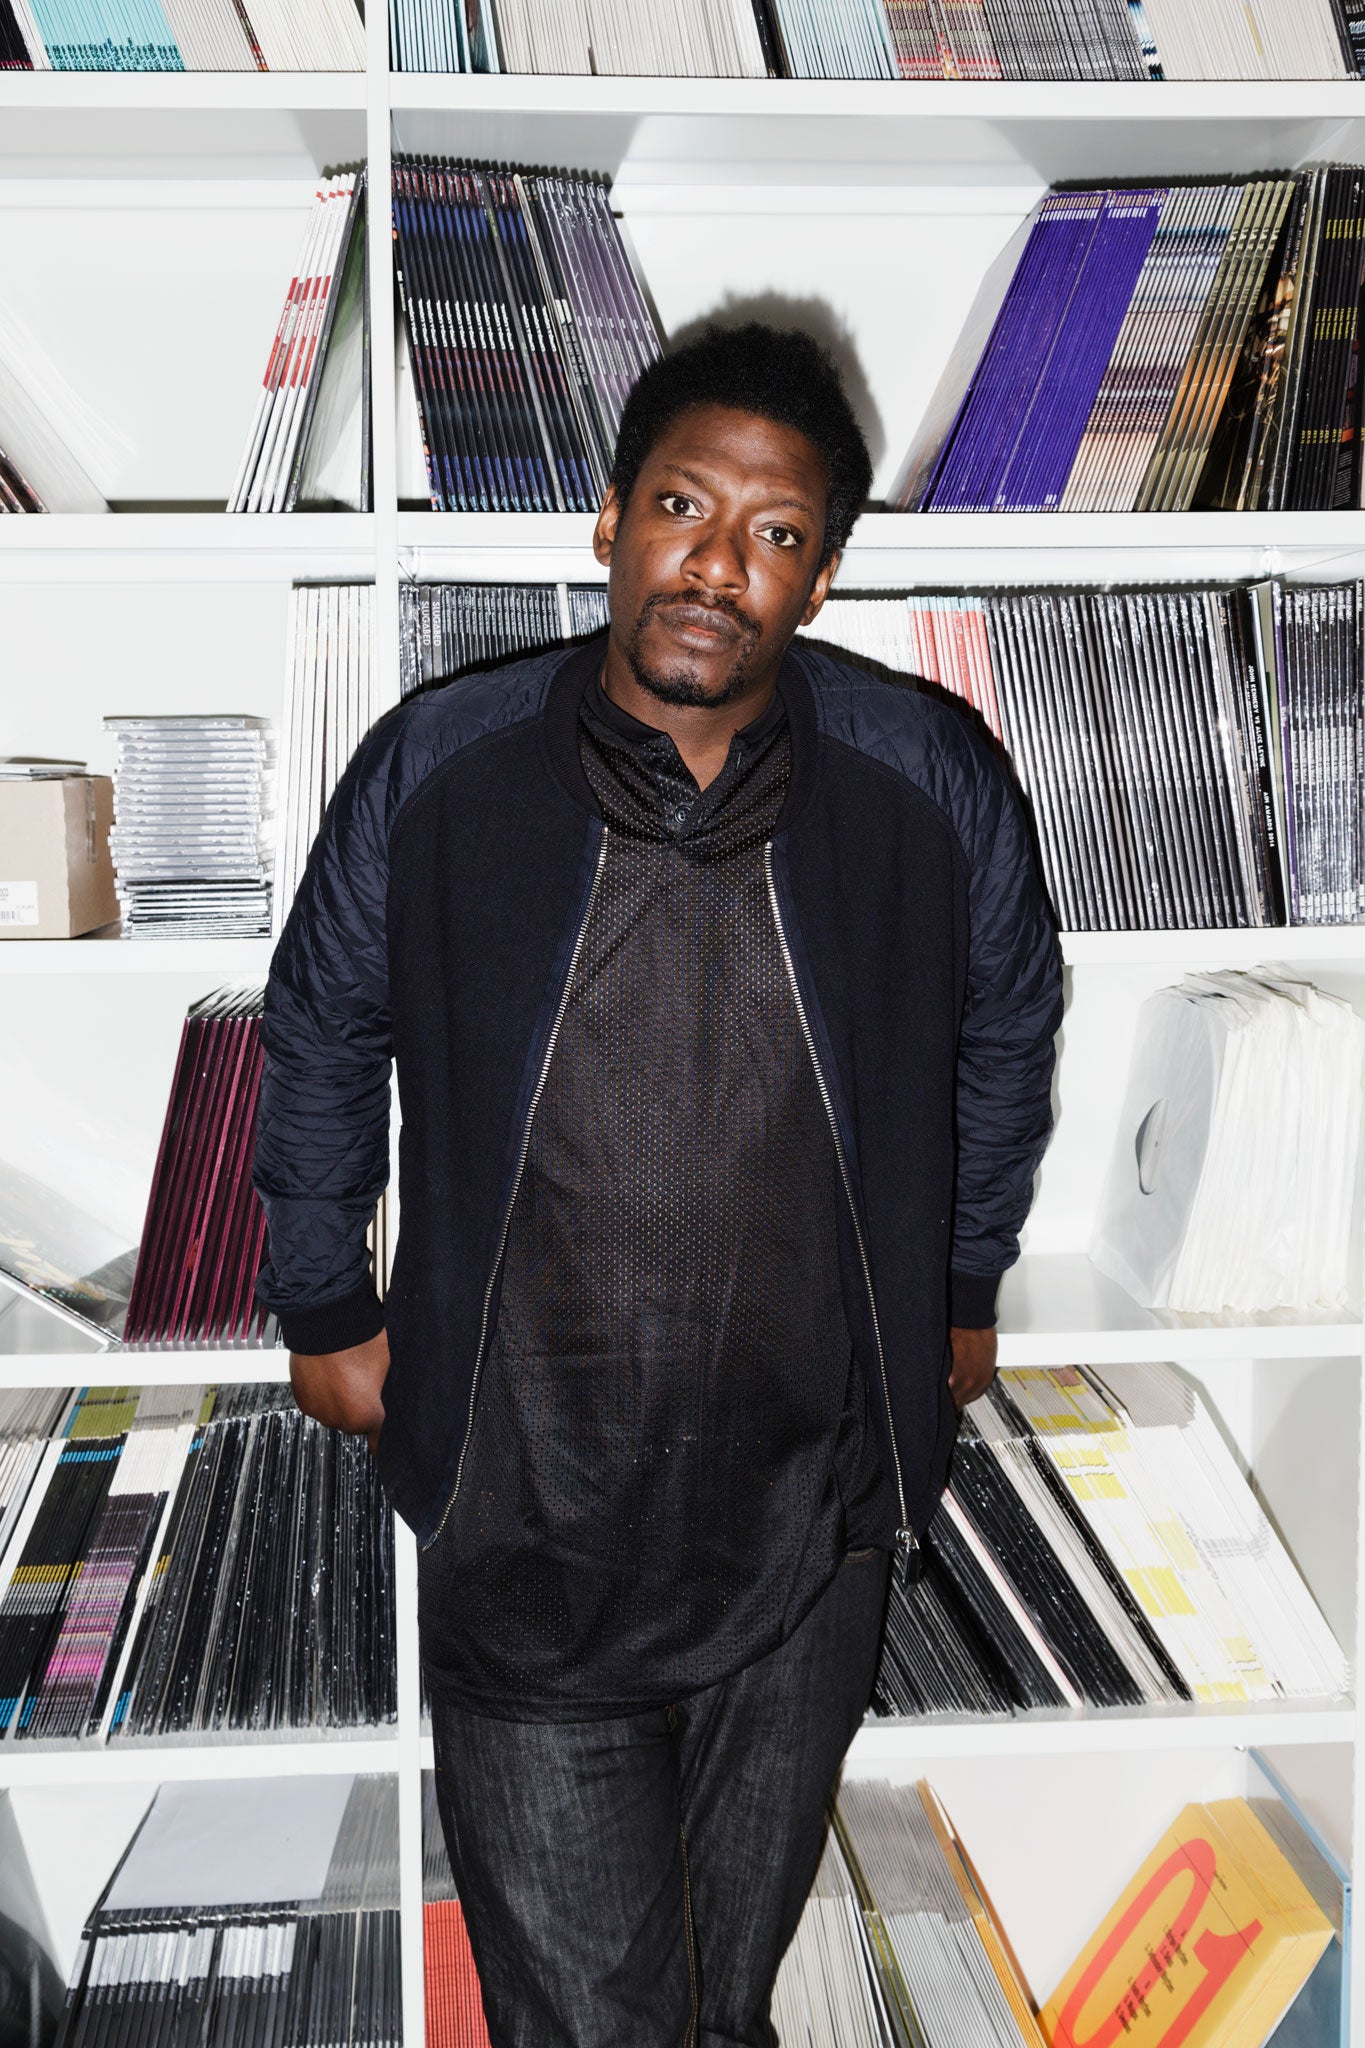 Manuva says: 'I was hitting the skunk weed way too hard. It got to the point where I didn't want to leave the house'